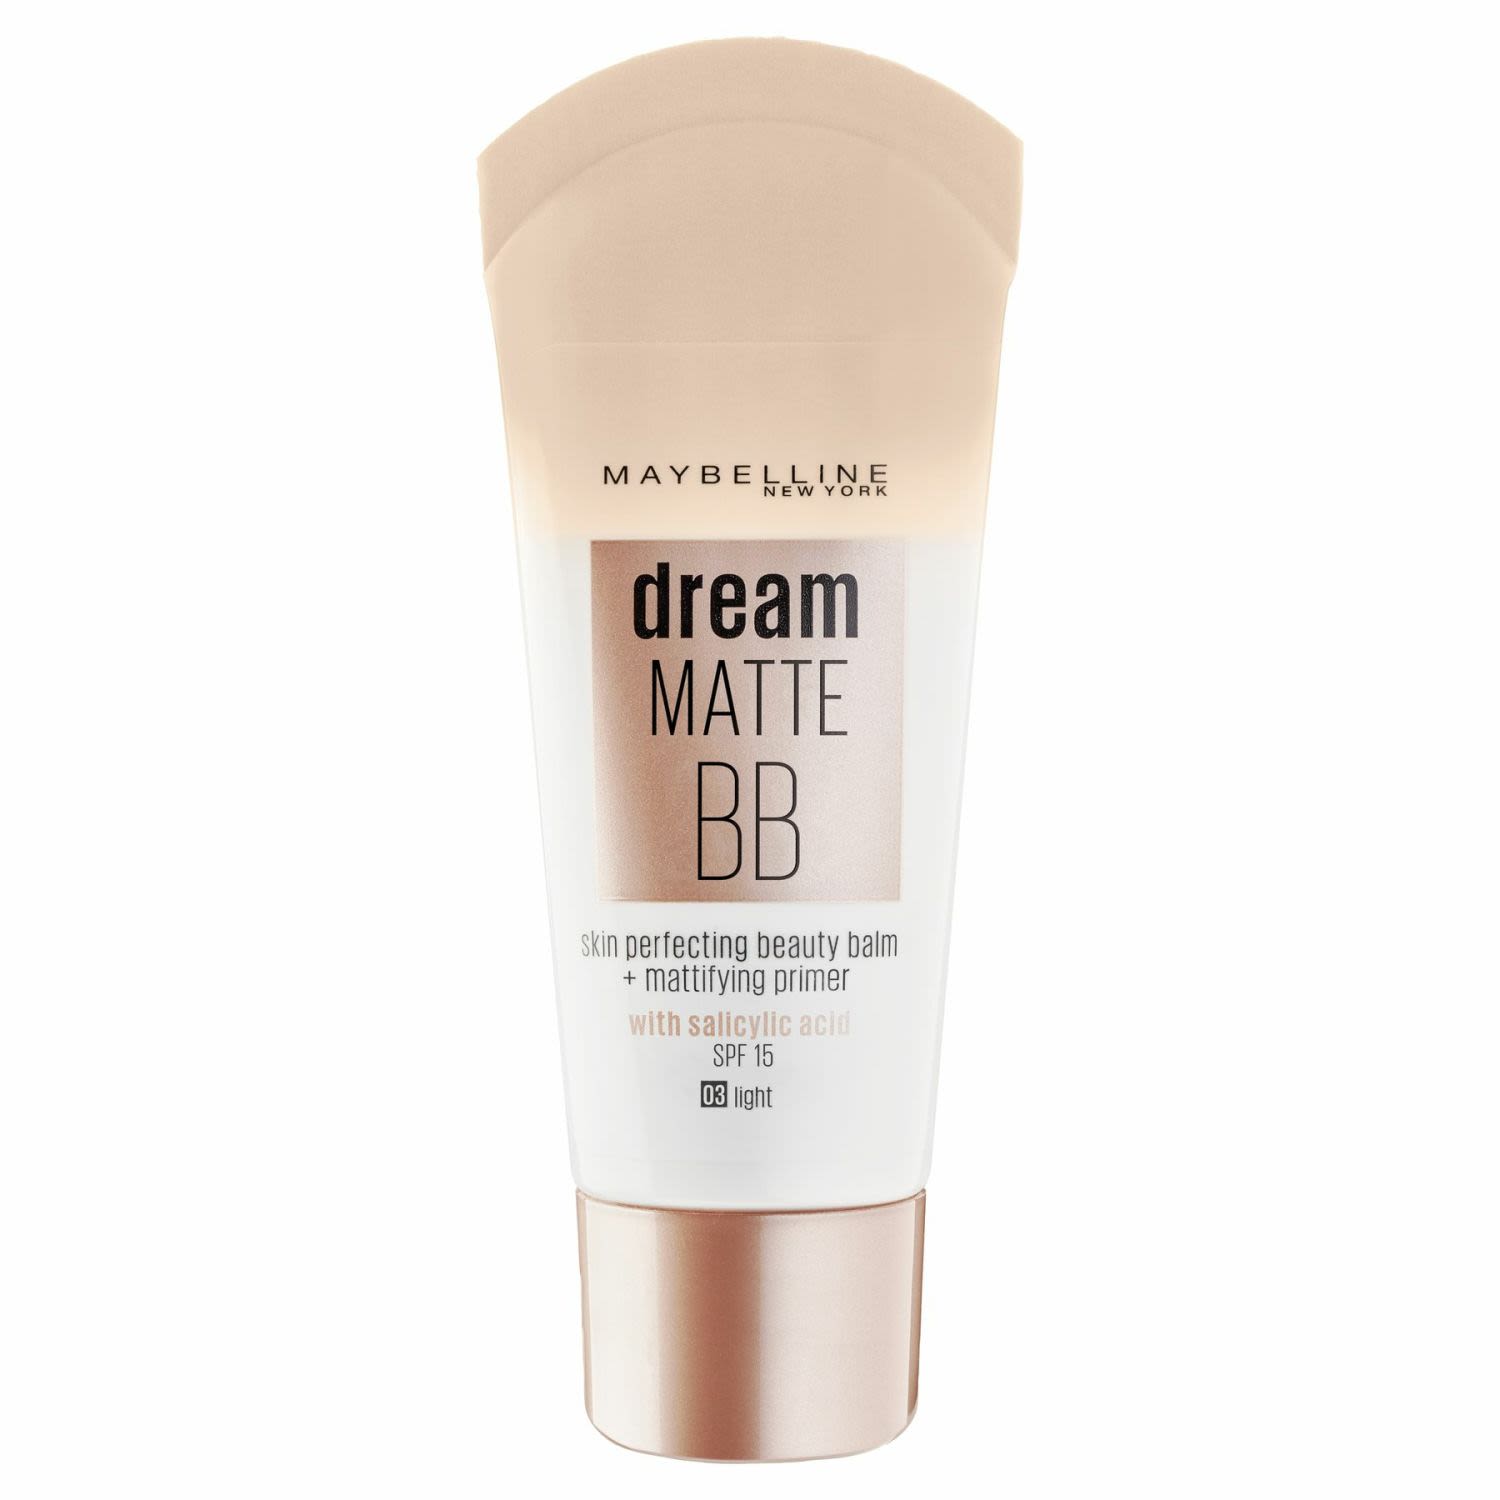 Maybelline Dream Matte BB Cream is made with 2% salicylic acid to conceal imperfections, minimise the appearance of pores and achieve healthy, hydrated looking skin. The light, fresh formula of this BB Cream is oil free and won't clog pores.<br /> <br />